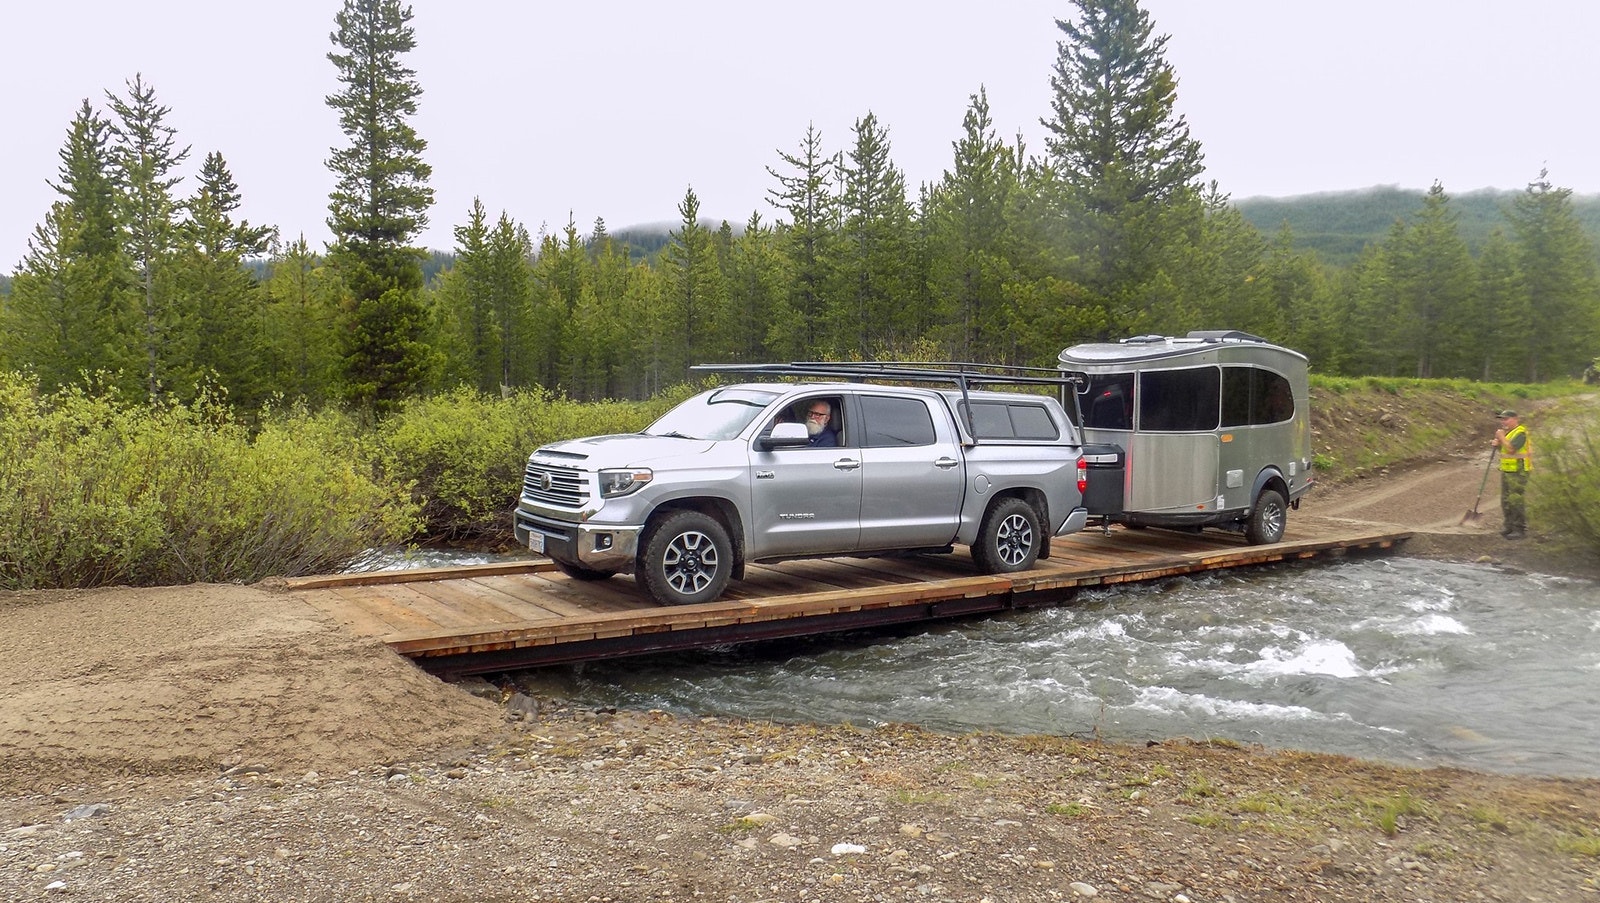 Campers were able to roll out after only being stranded for a single night when a bridge washed out in Grand Teton park.